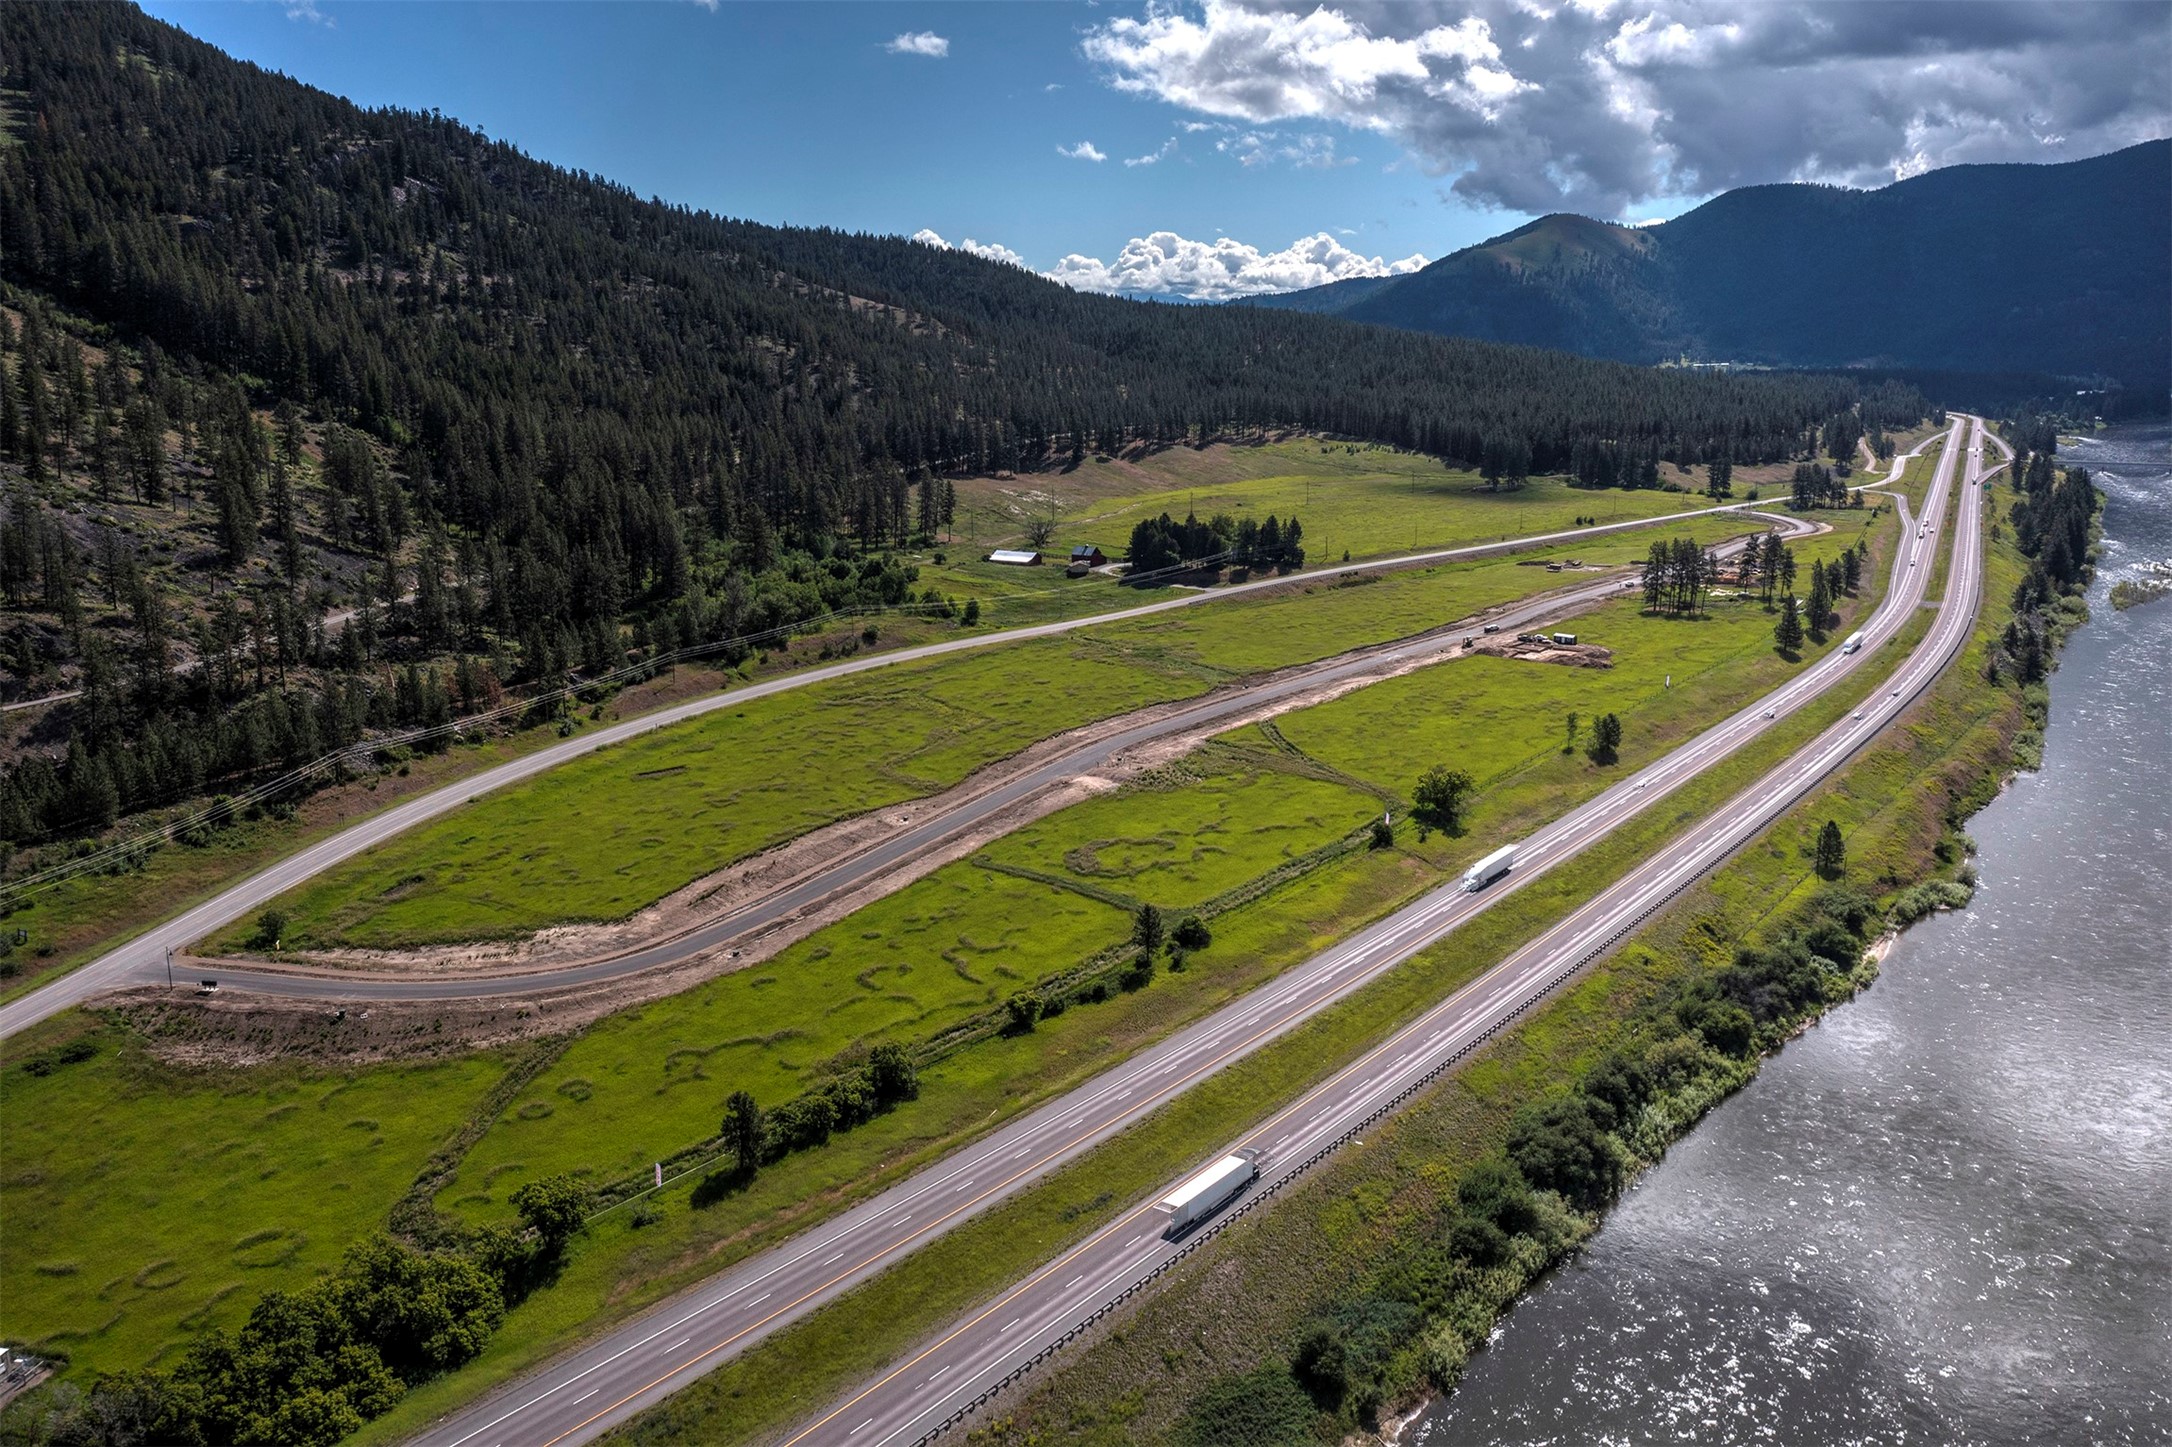 Lot 19, The Meadows At Thompson Ranch, Alberton, MT 59820